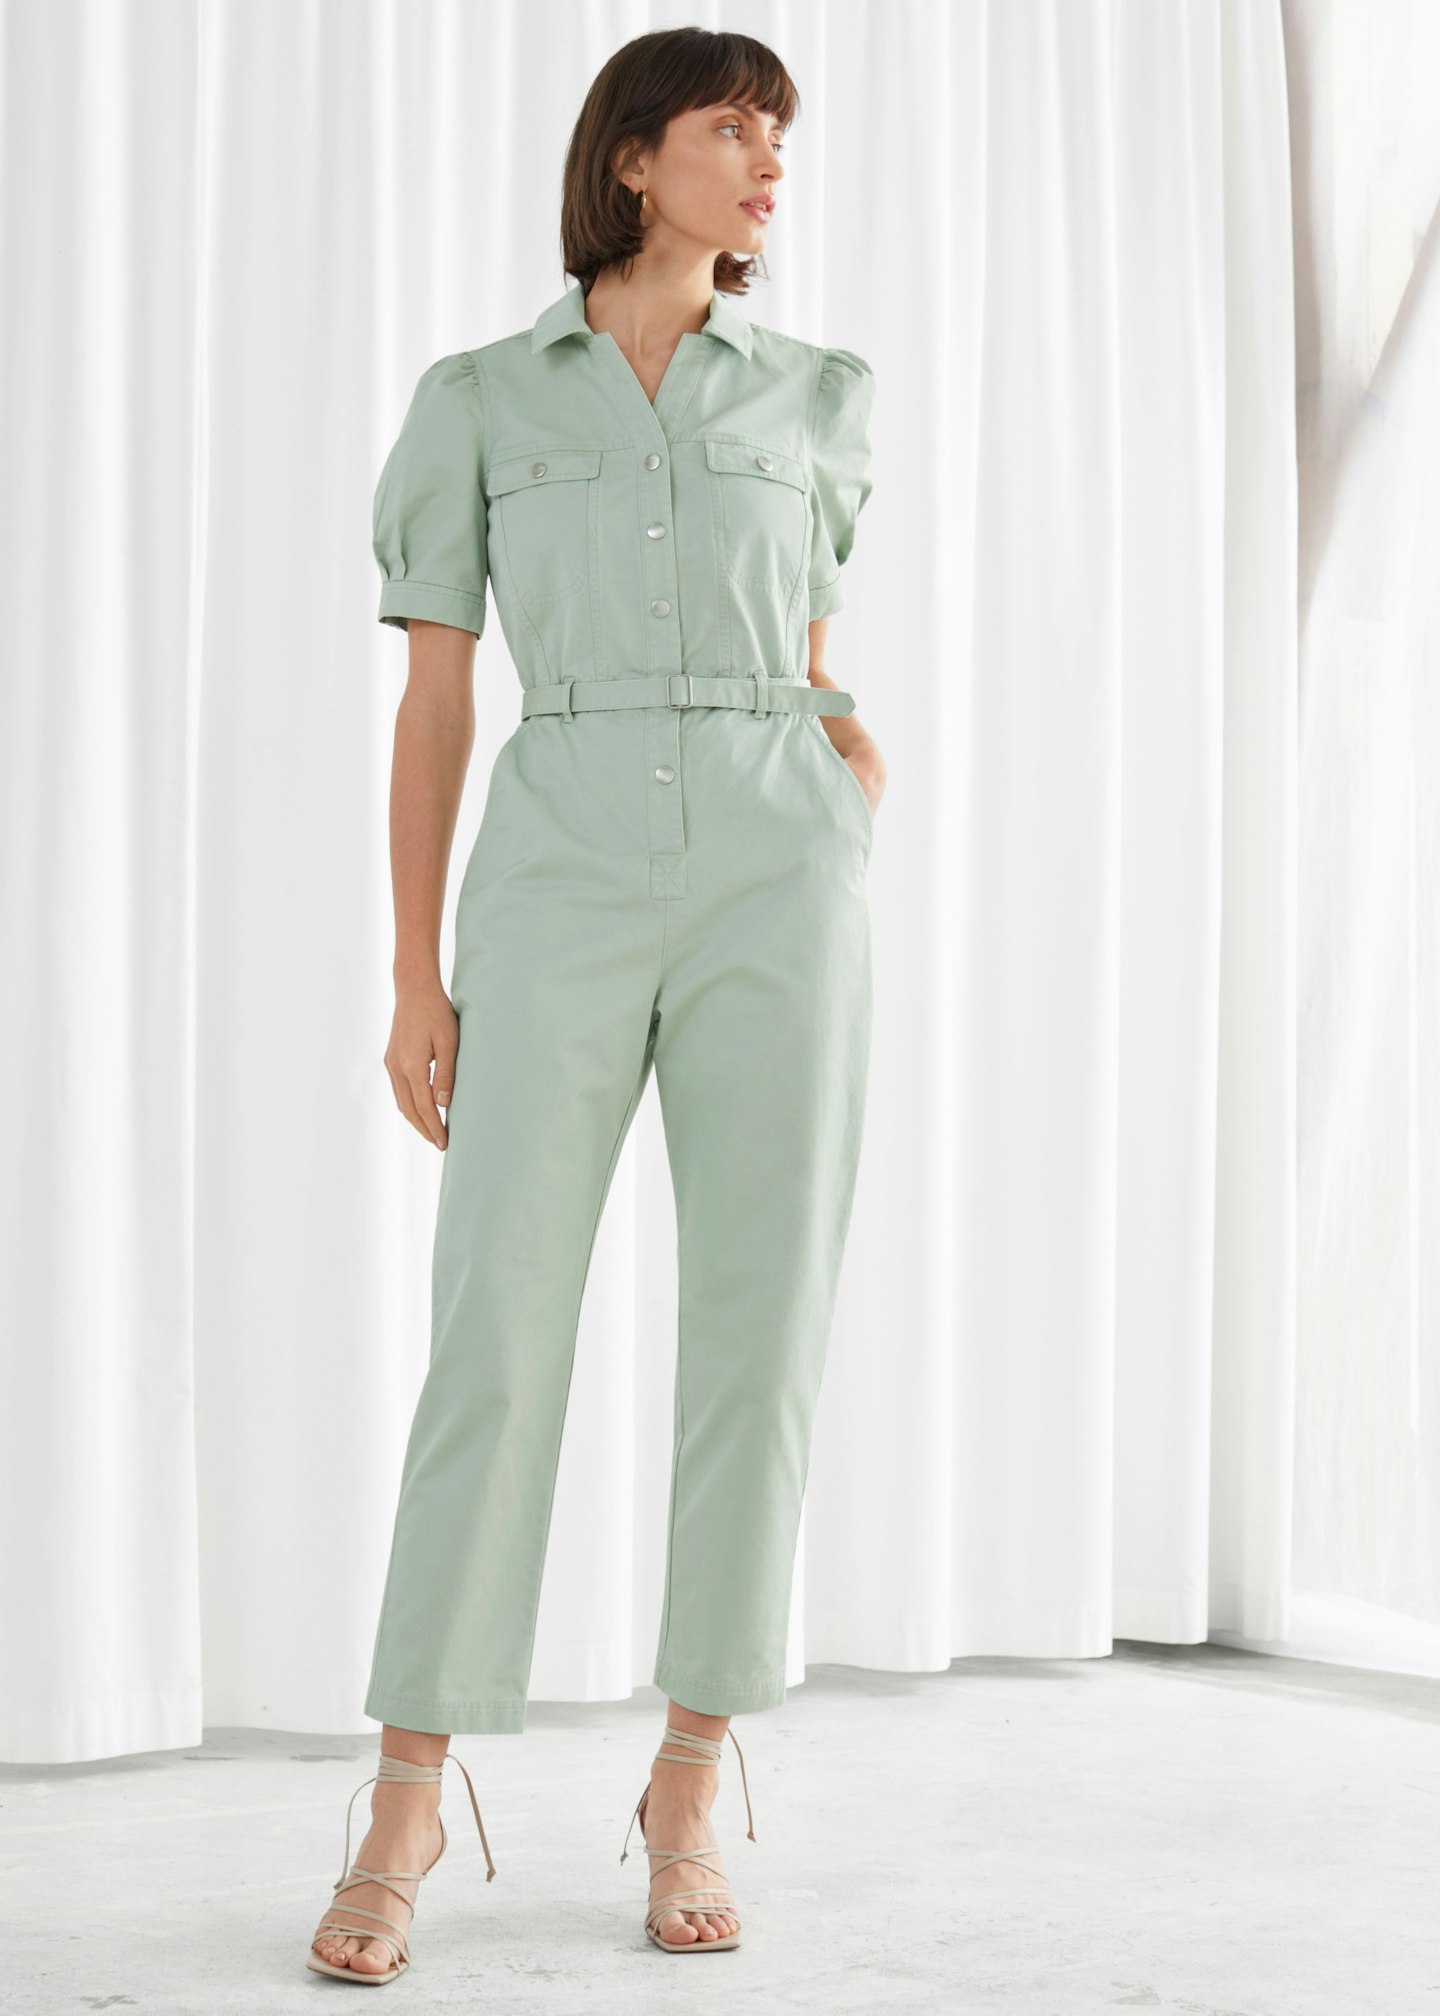 & Other Stories, Organic Cotton Twill Jumpsuit, £95